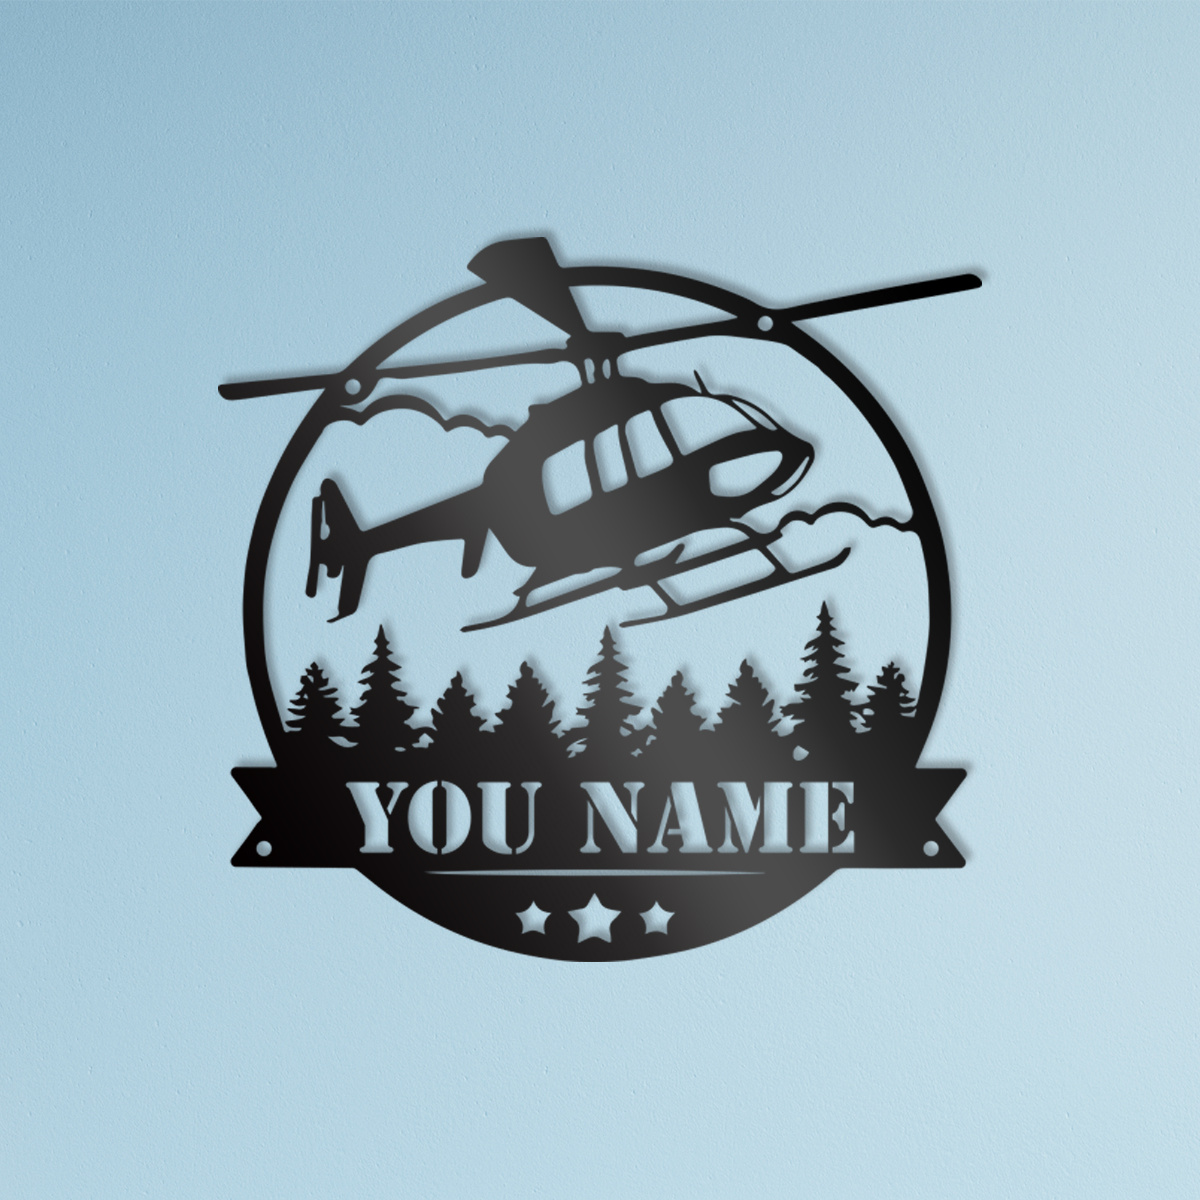 

Custom Helicopter & Airplane Metal Wall Art - Personalized Name Sign For Home Decor, Aviation Enthusiast Gift, Ideal For Hangar & Housewarming